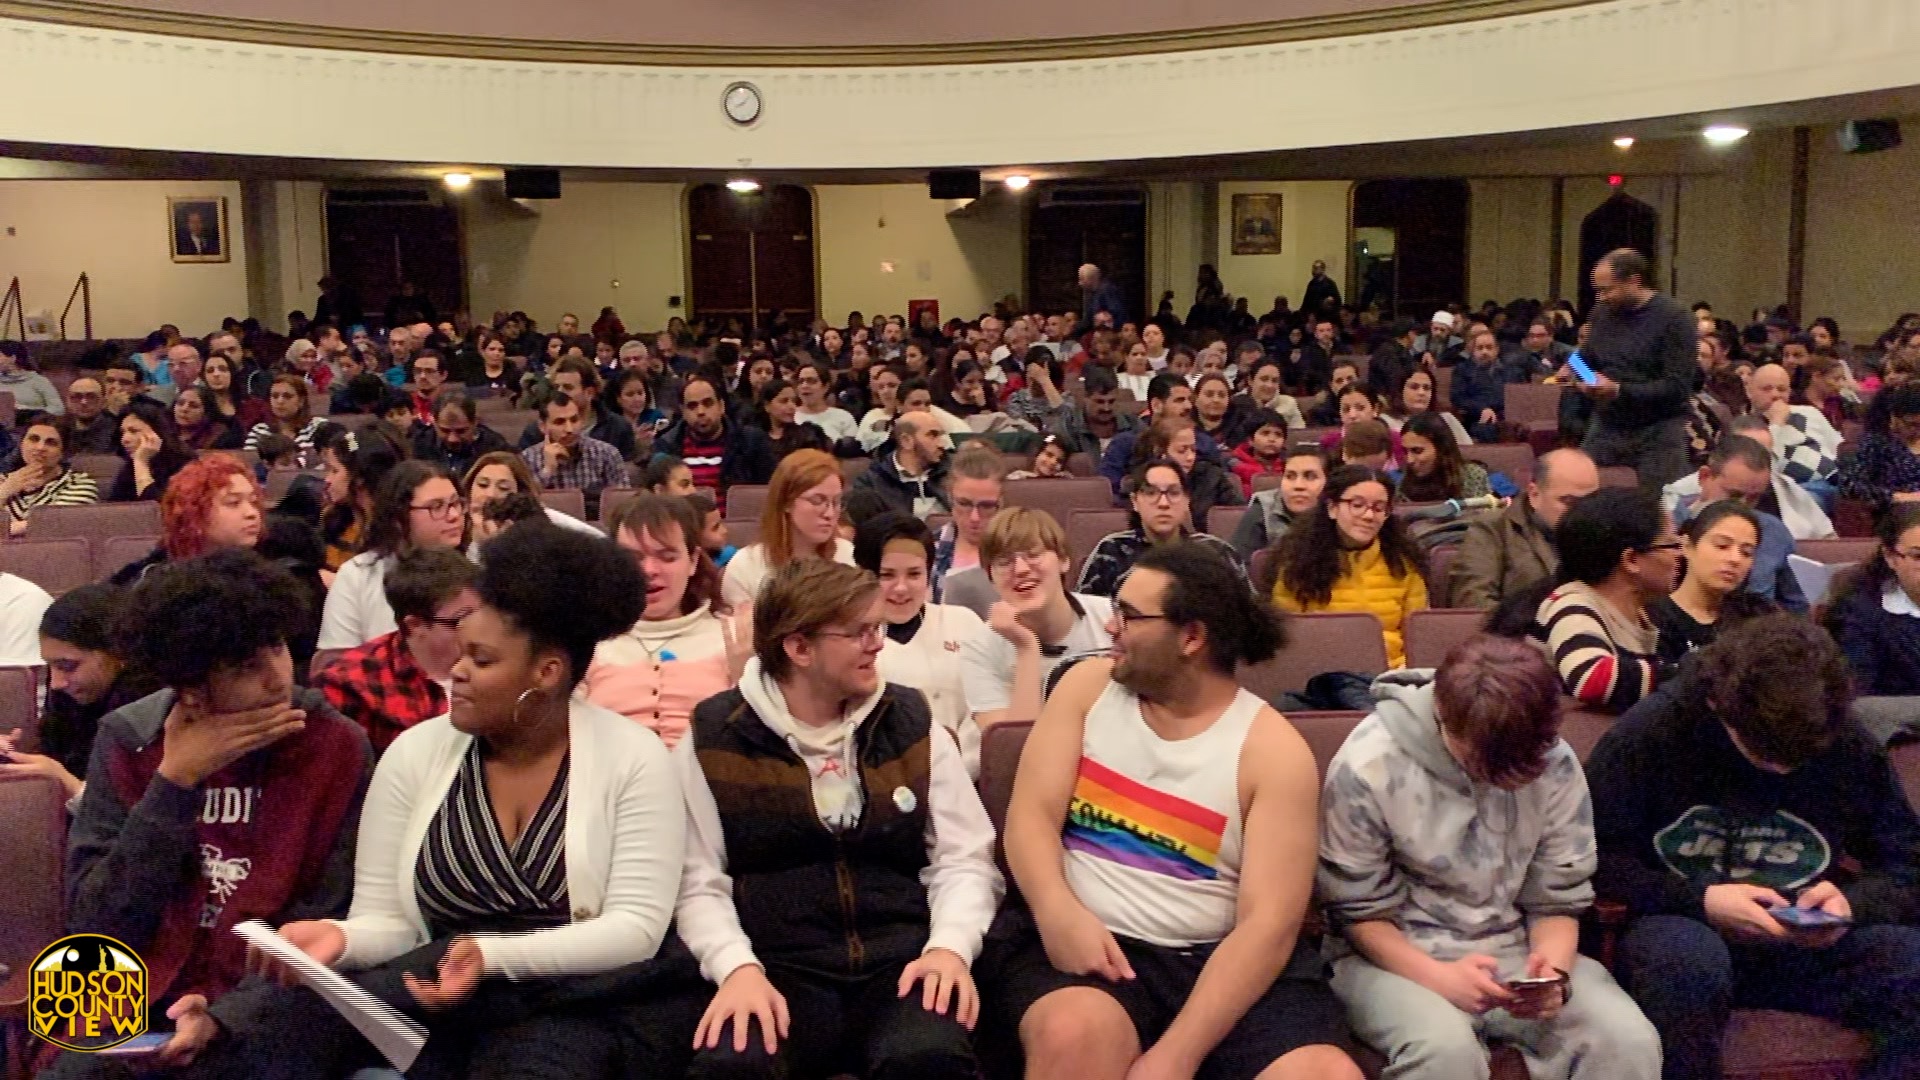 Heated discussion breaks out at Bayonne BOE meeting over LGBTQ